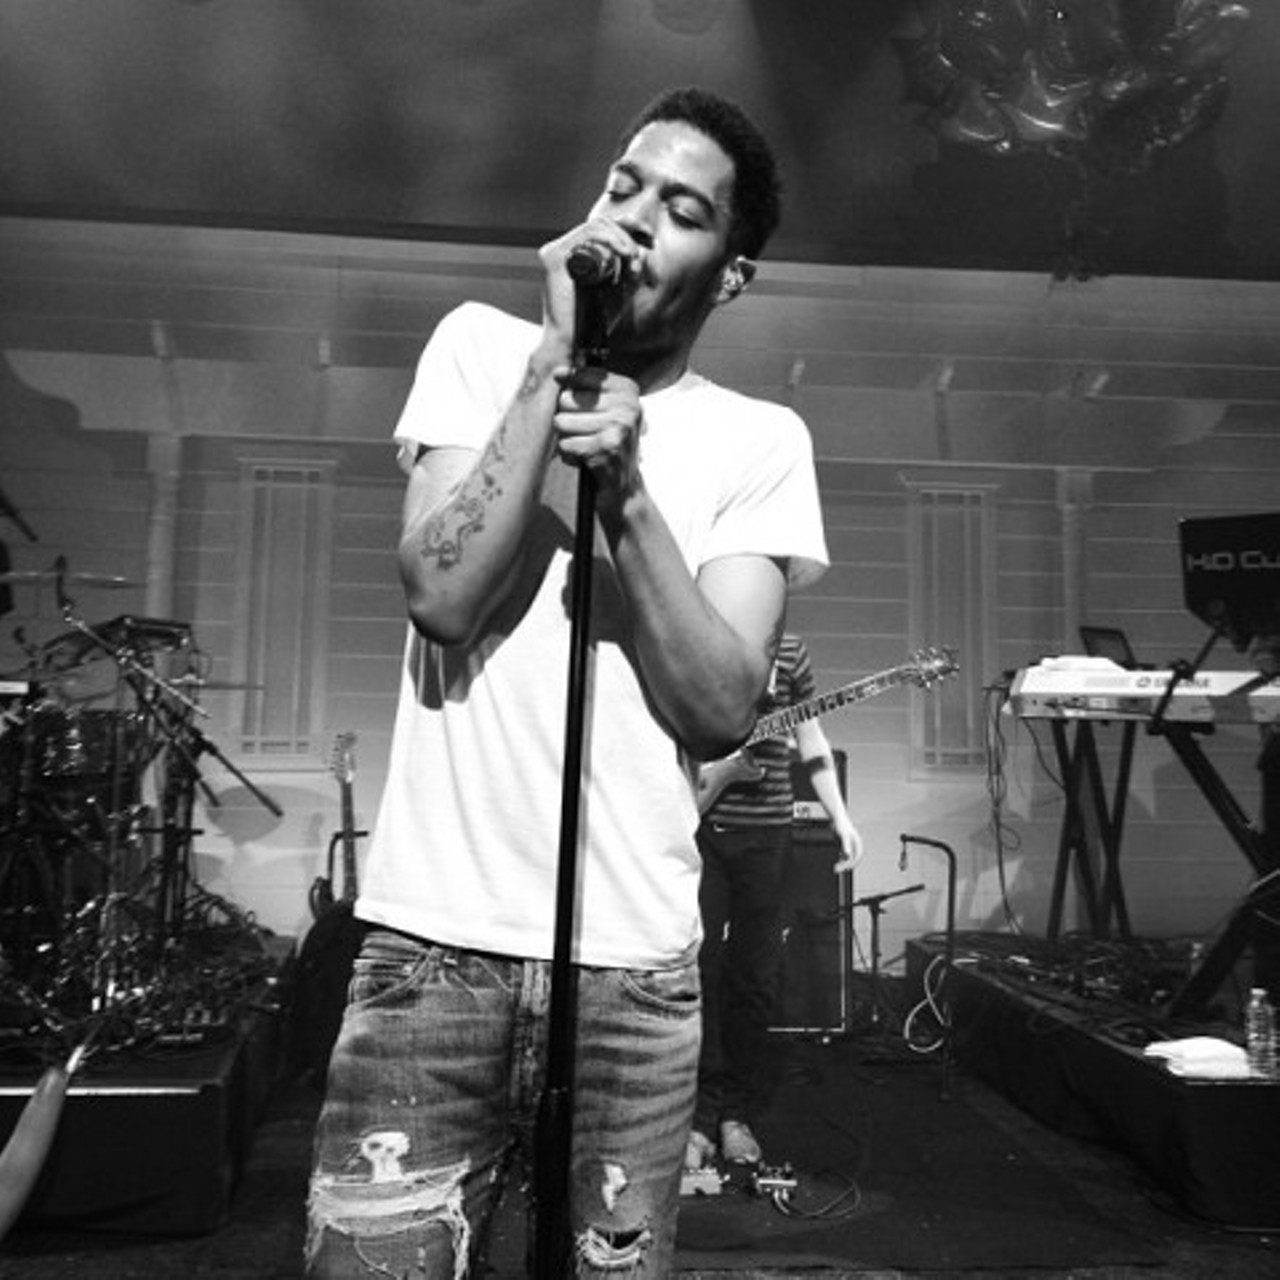 Kid Cudi
Shaker Heights High School
Kid Cudi has six studio albums from his time as a solo rapper, but he is also a member of the rock band WZRD. 
Photo via Sellahremy/Wikimedia Commons